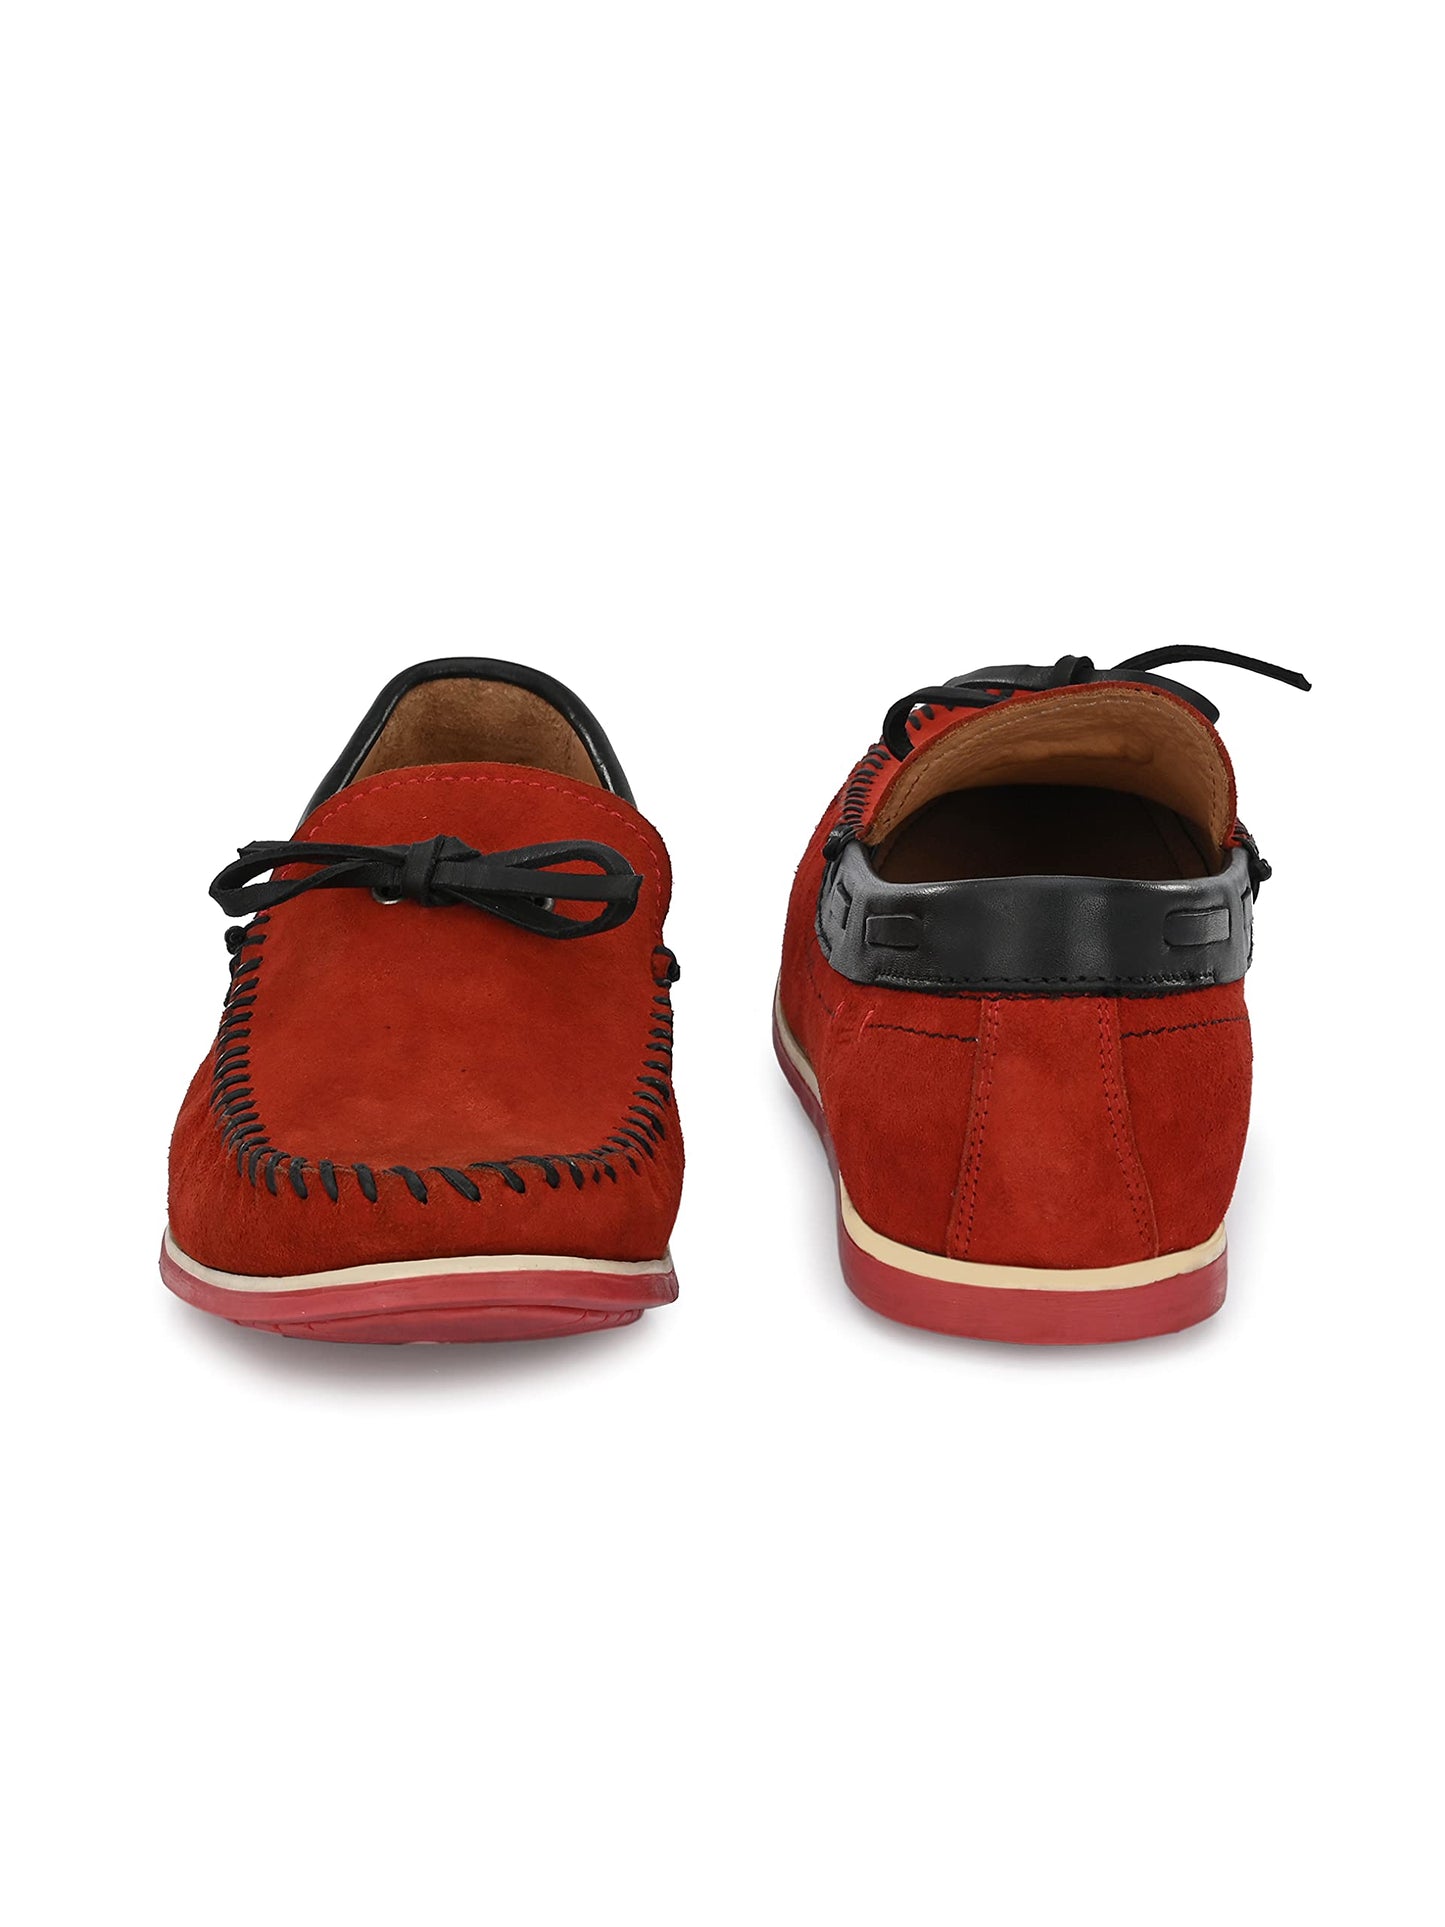 HITZ Men's Red Leather Moccasins Boat Shoes - 7